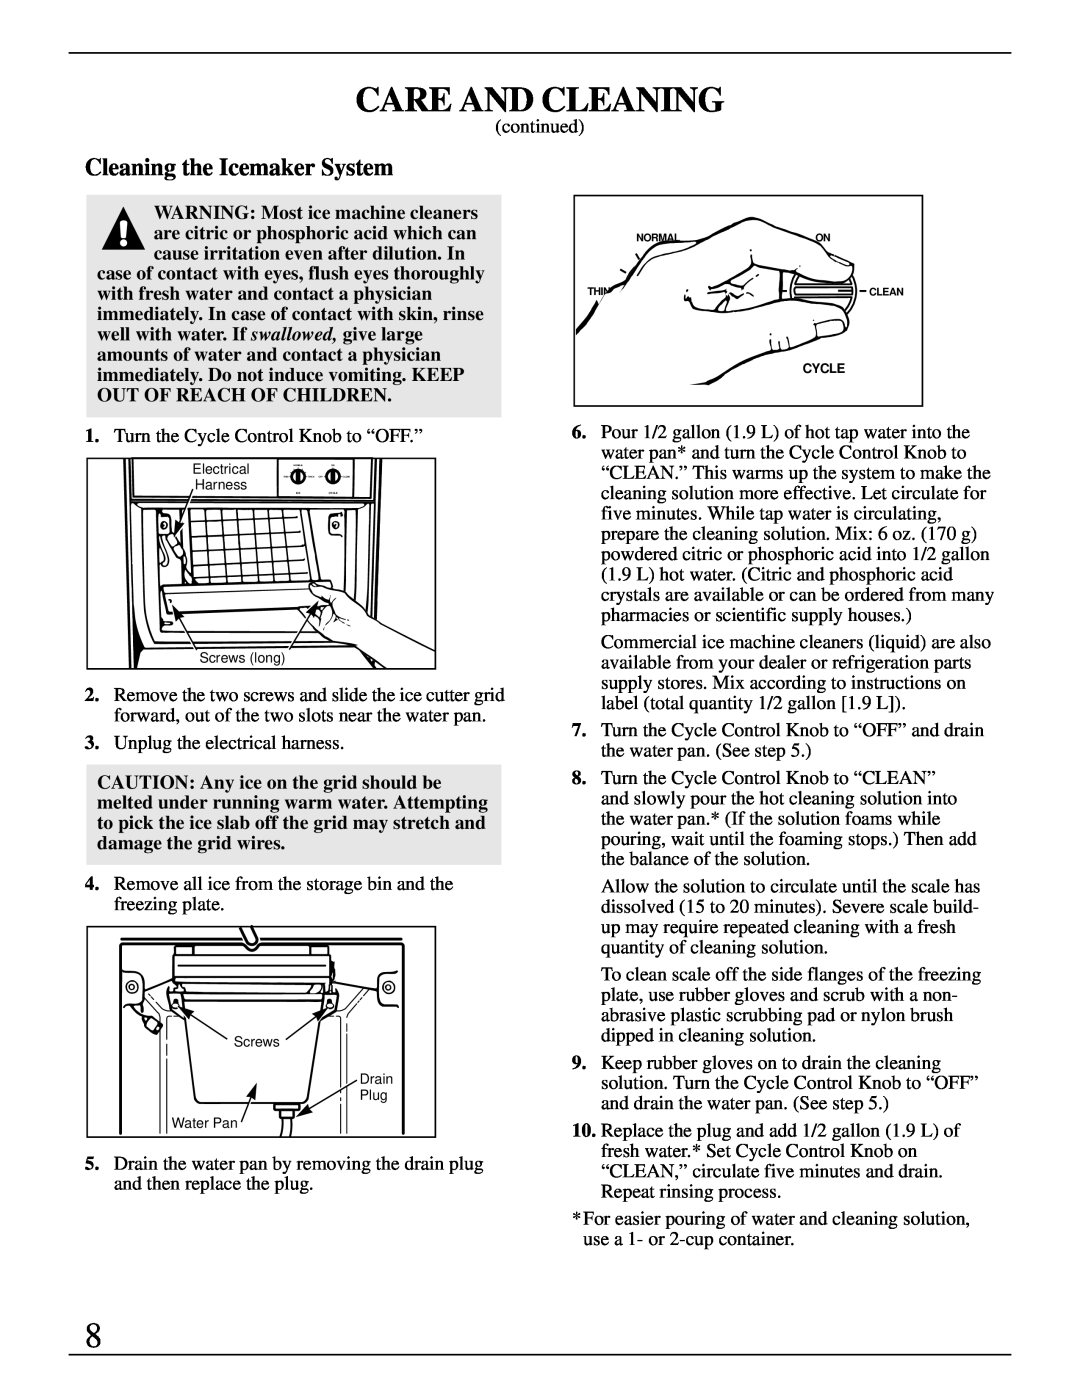 GE Monogram ZDIW50 installation instructions Cleaning the Icemaker System, Care And Cleaning, Electrical, Screws long 